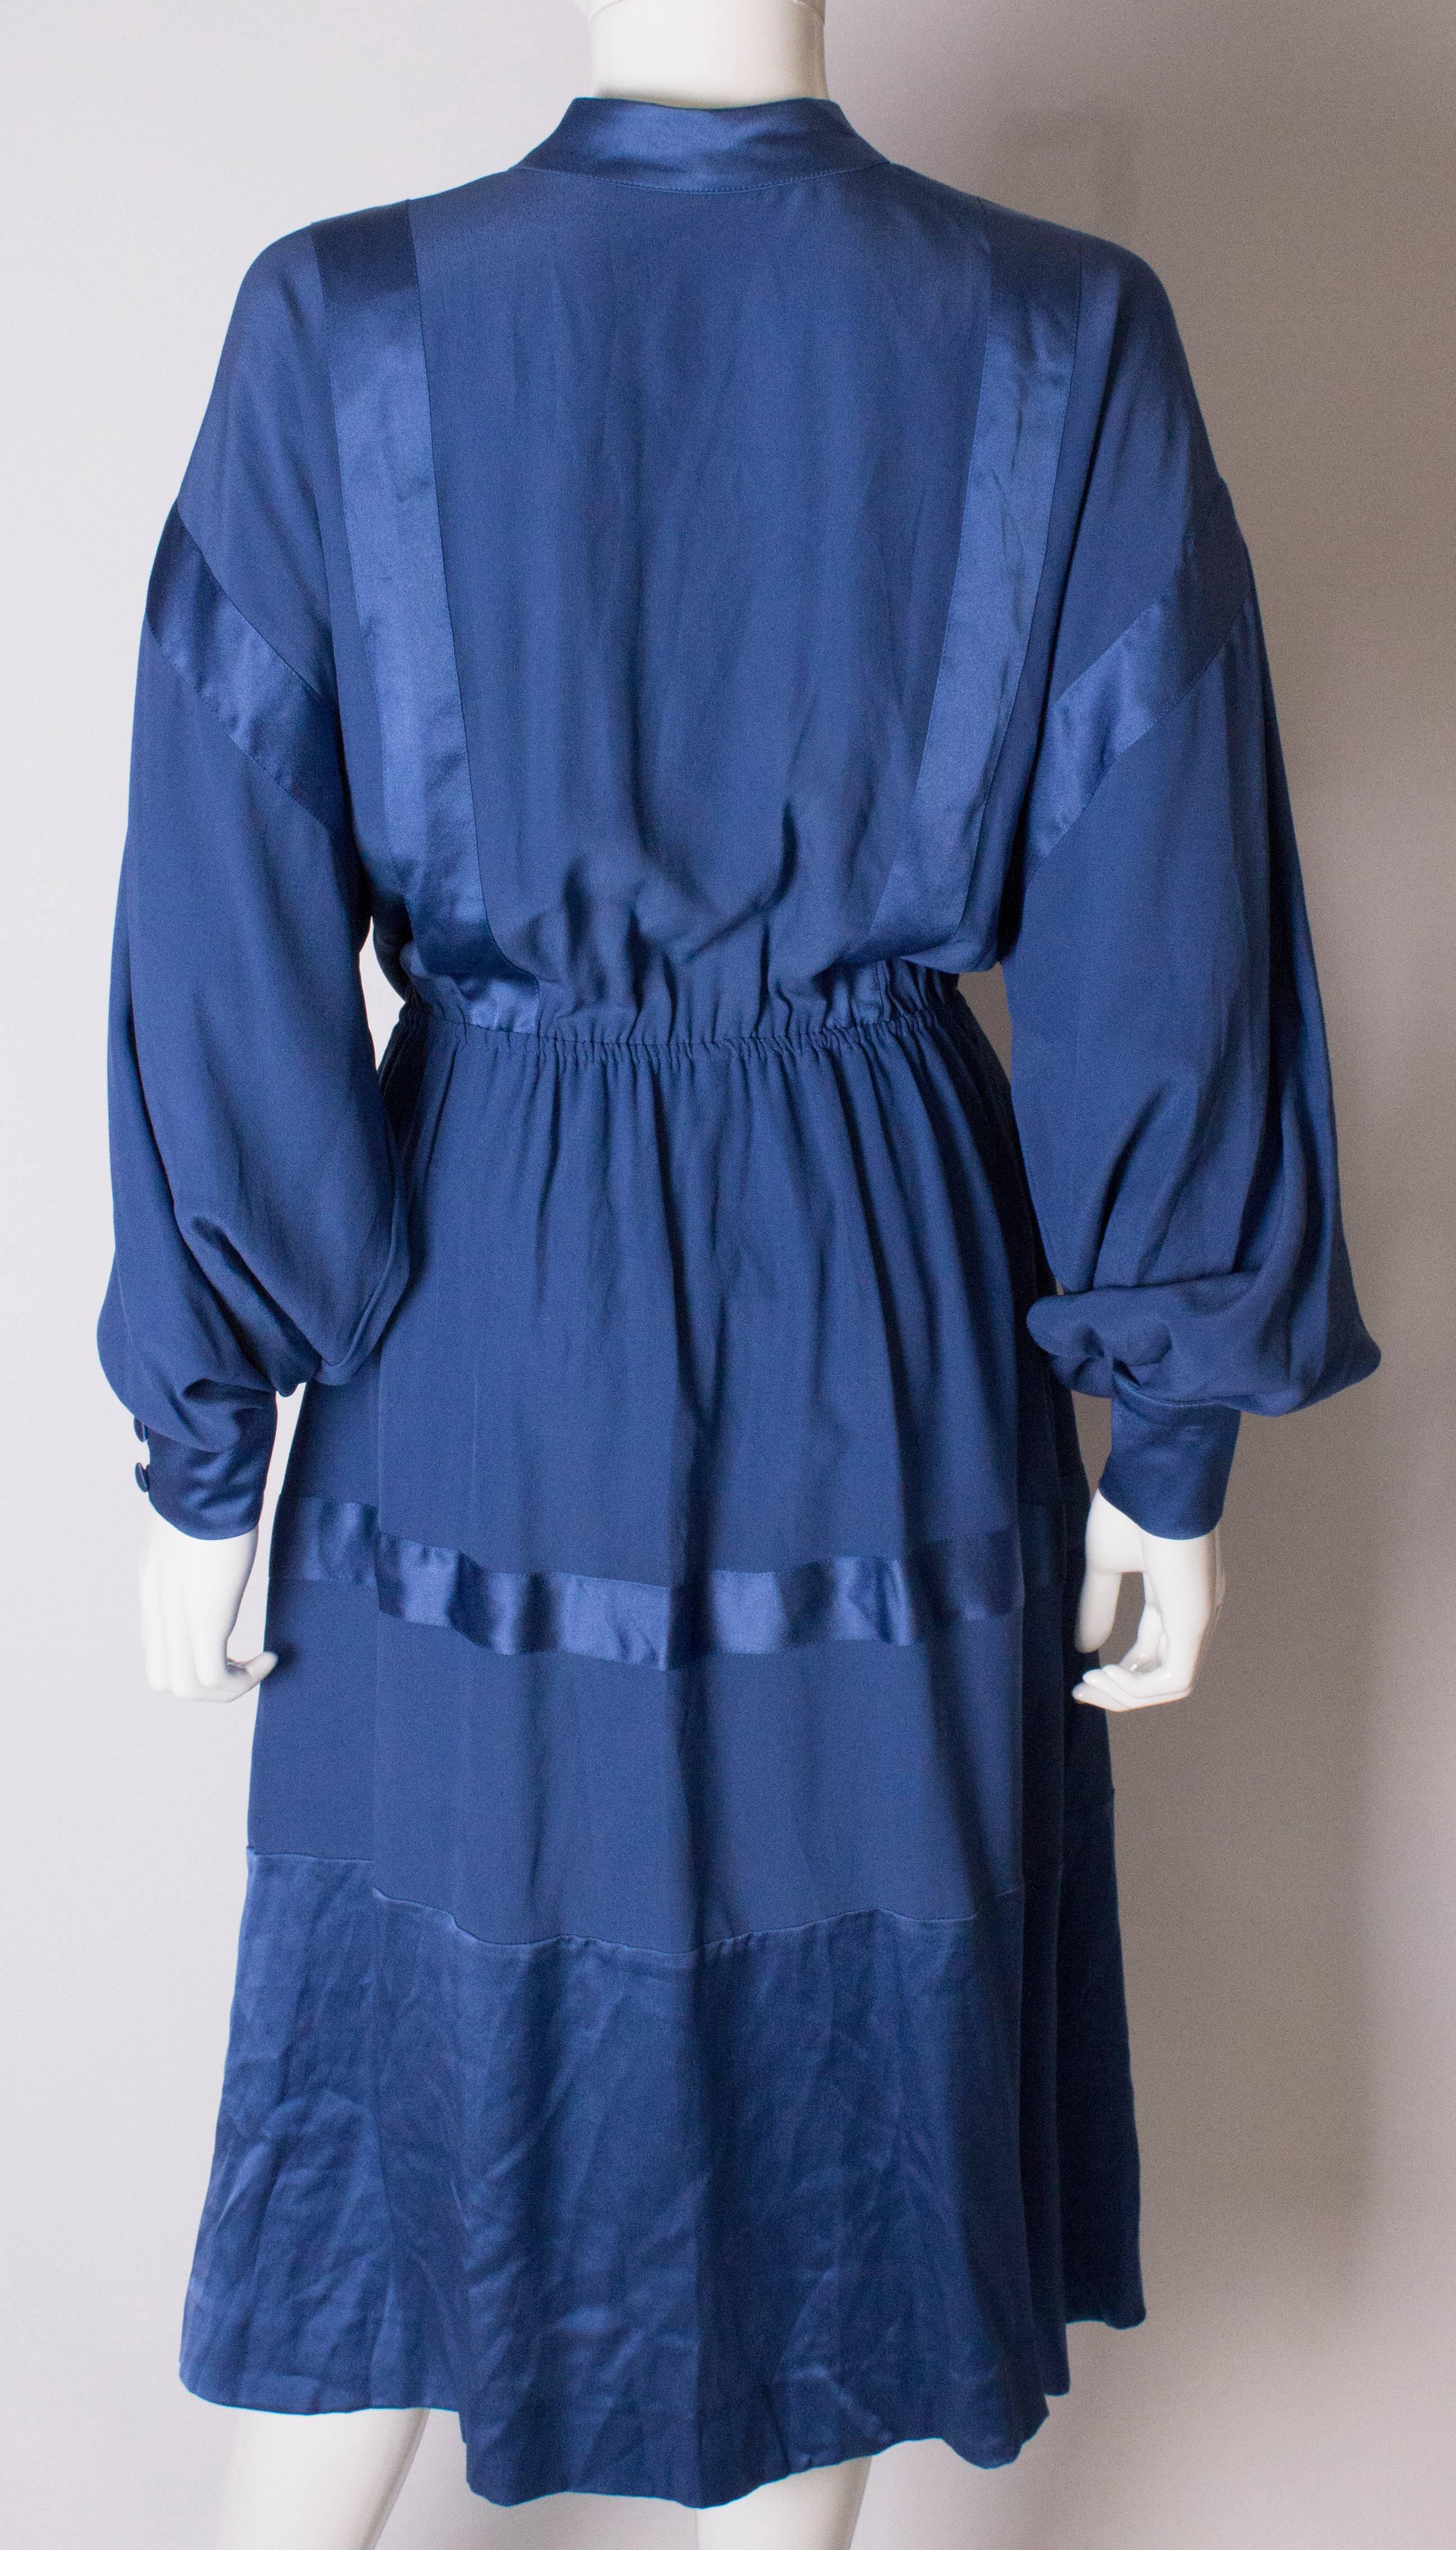 Women's A Vintage 1970s  blue Silk Dress by Stefano Ricci for Herbie Frogg For Sale